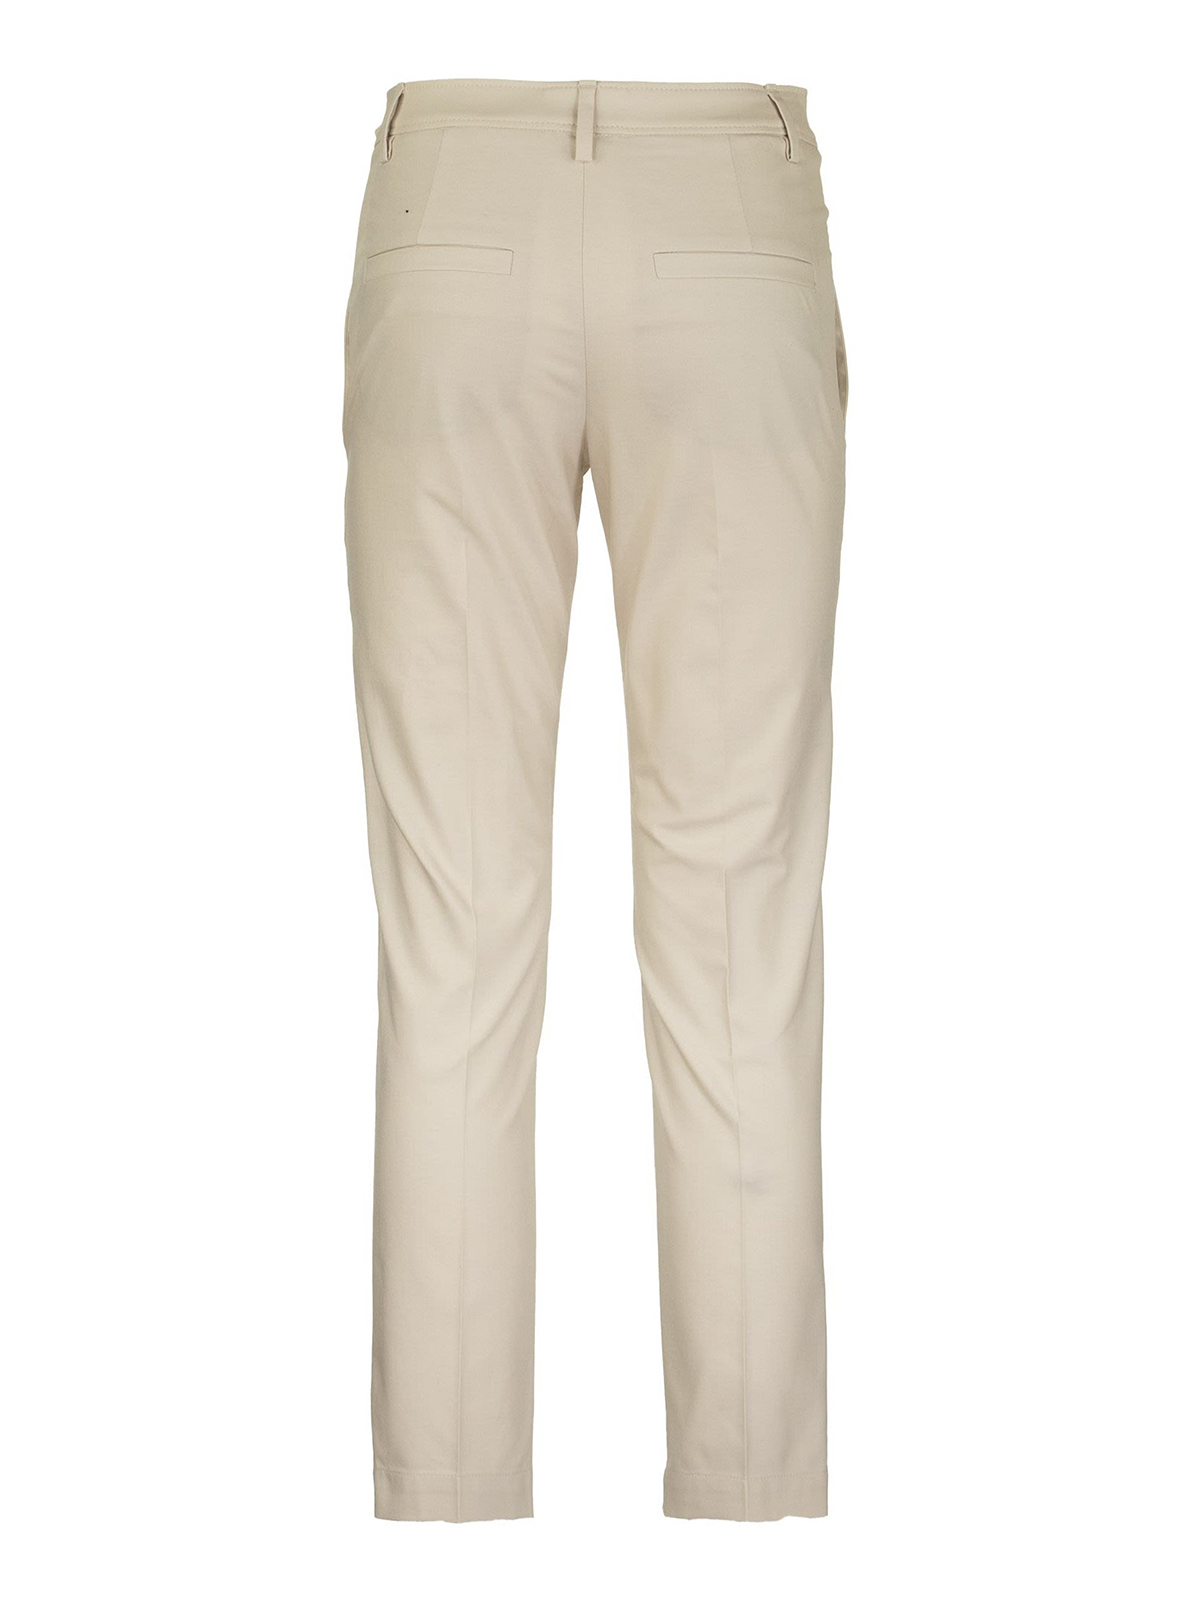 Tailored & Formal trousers Alexander Mcqueen - Crpe cigarette pants -  737345QEAAA5033